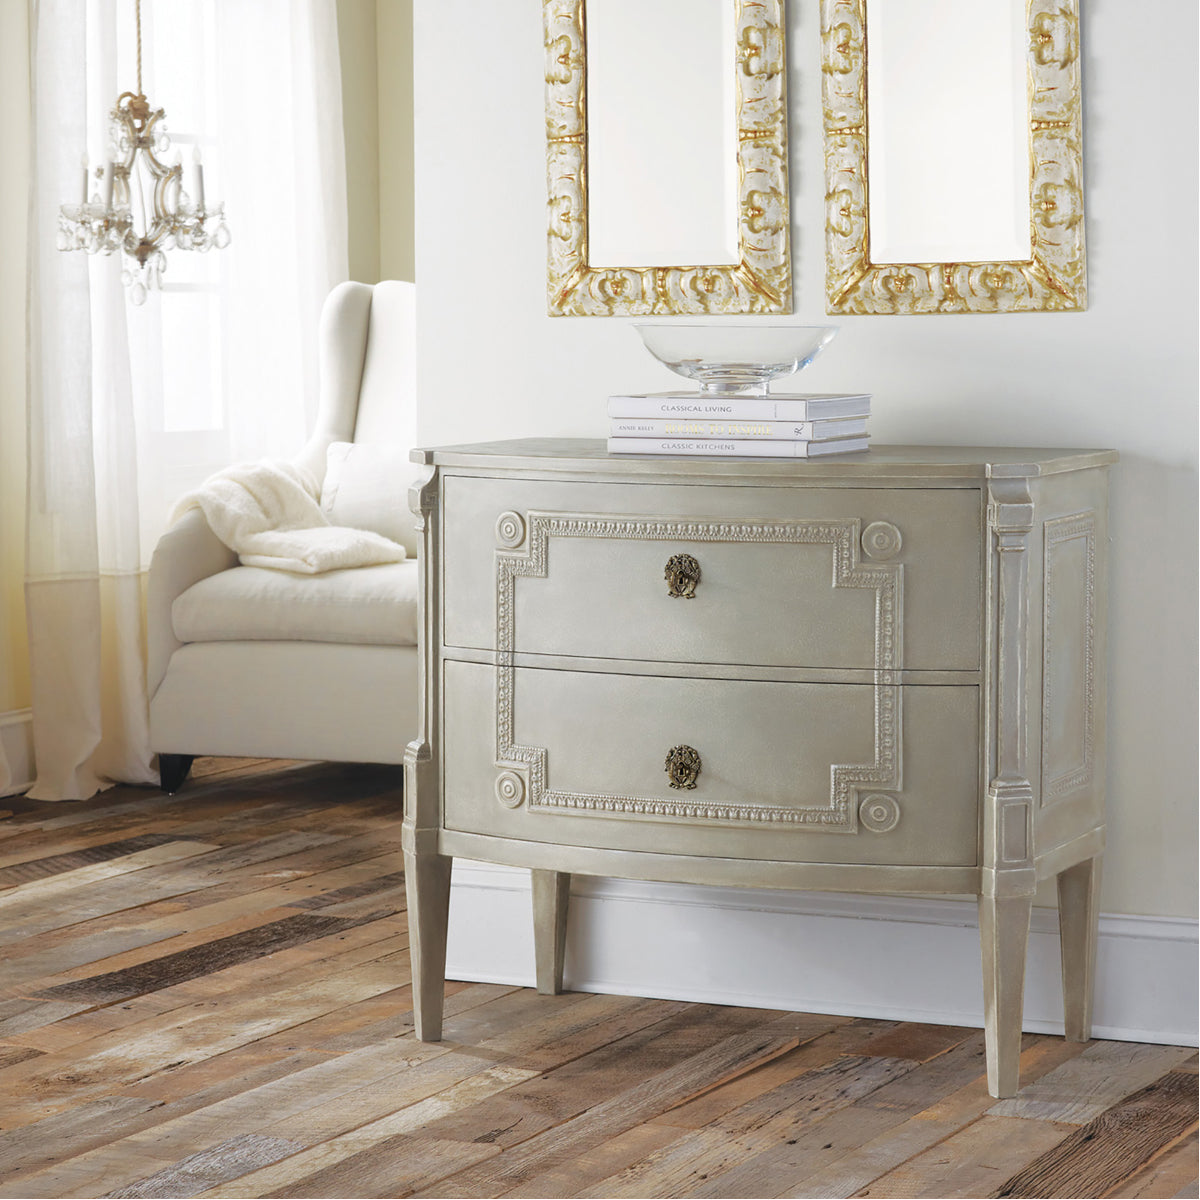 Modern History Bowfront Gustavian Commode